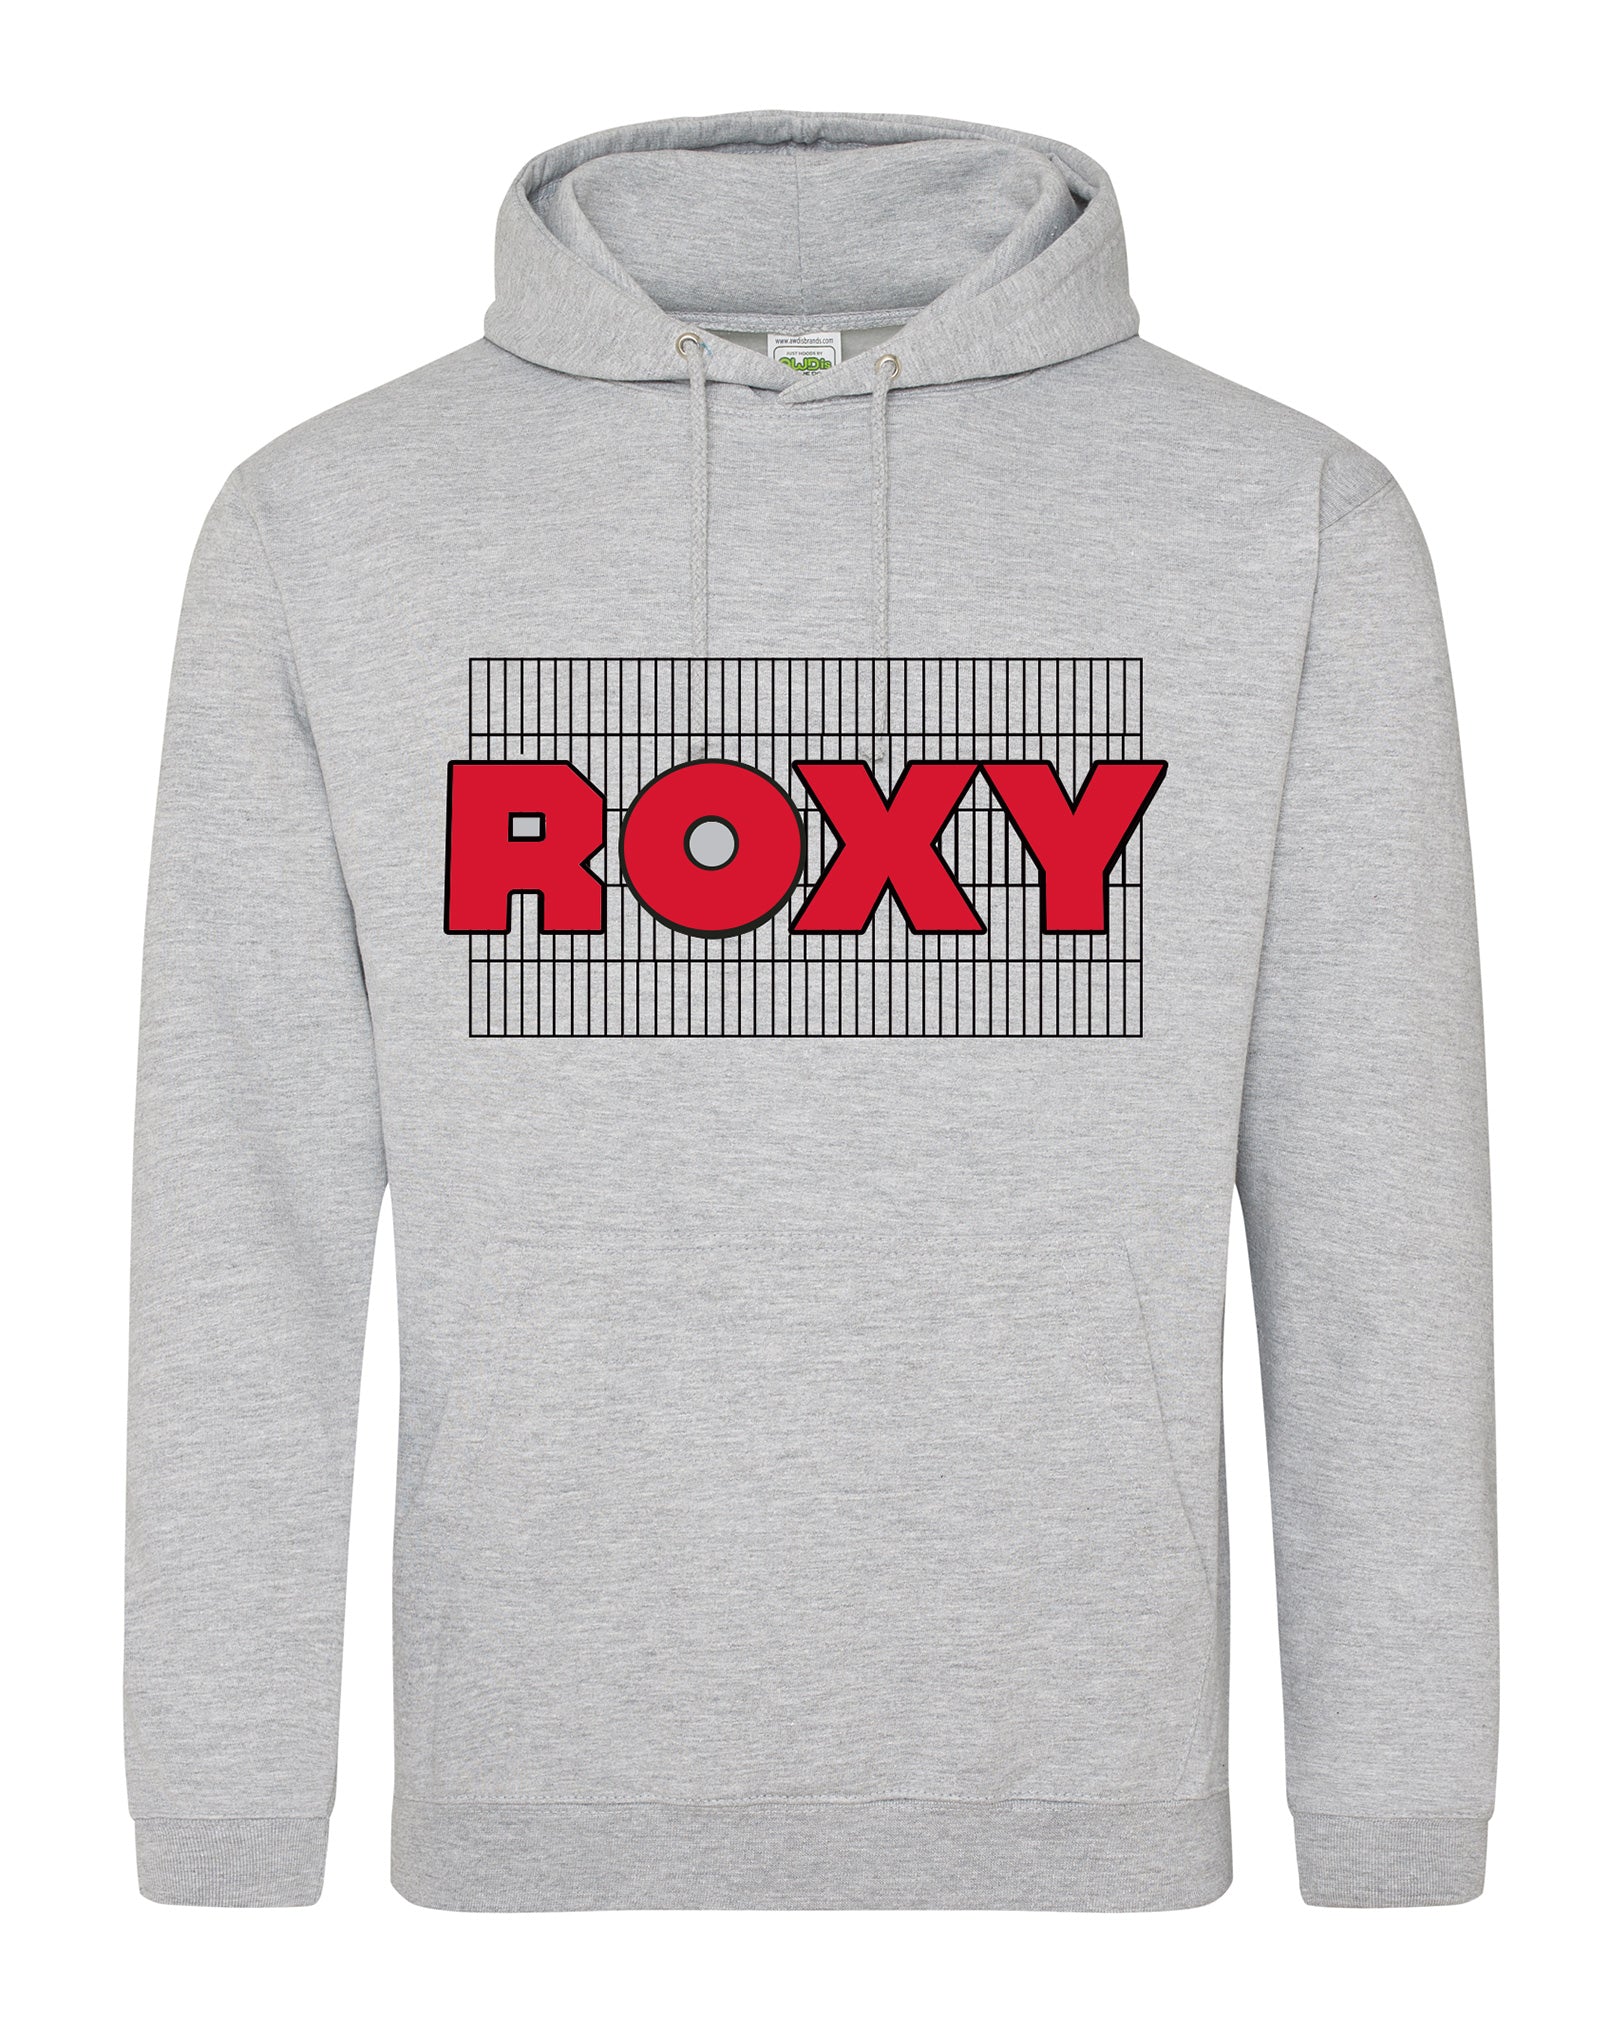 Roxy unisex fit hoodie - various colours - Dirty Stop Outs